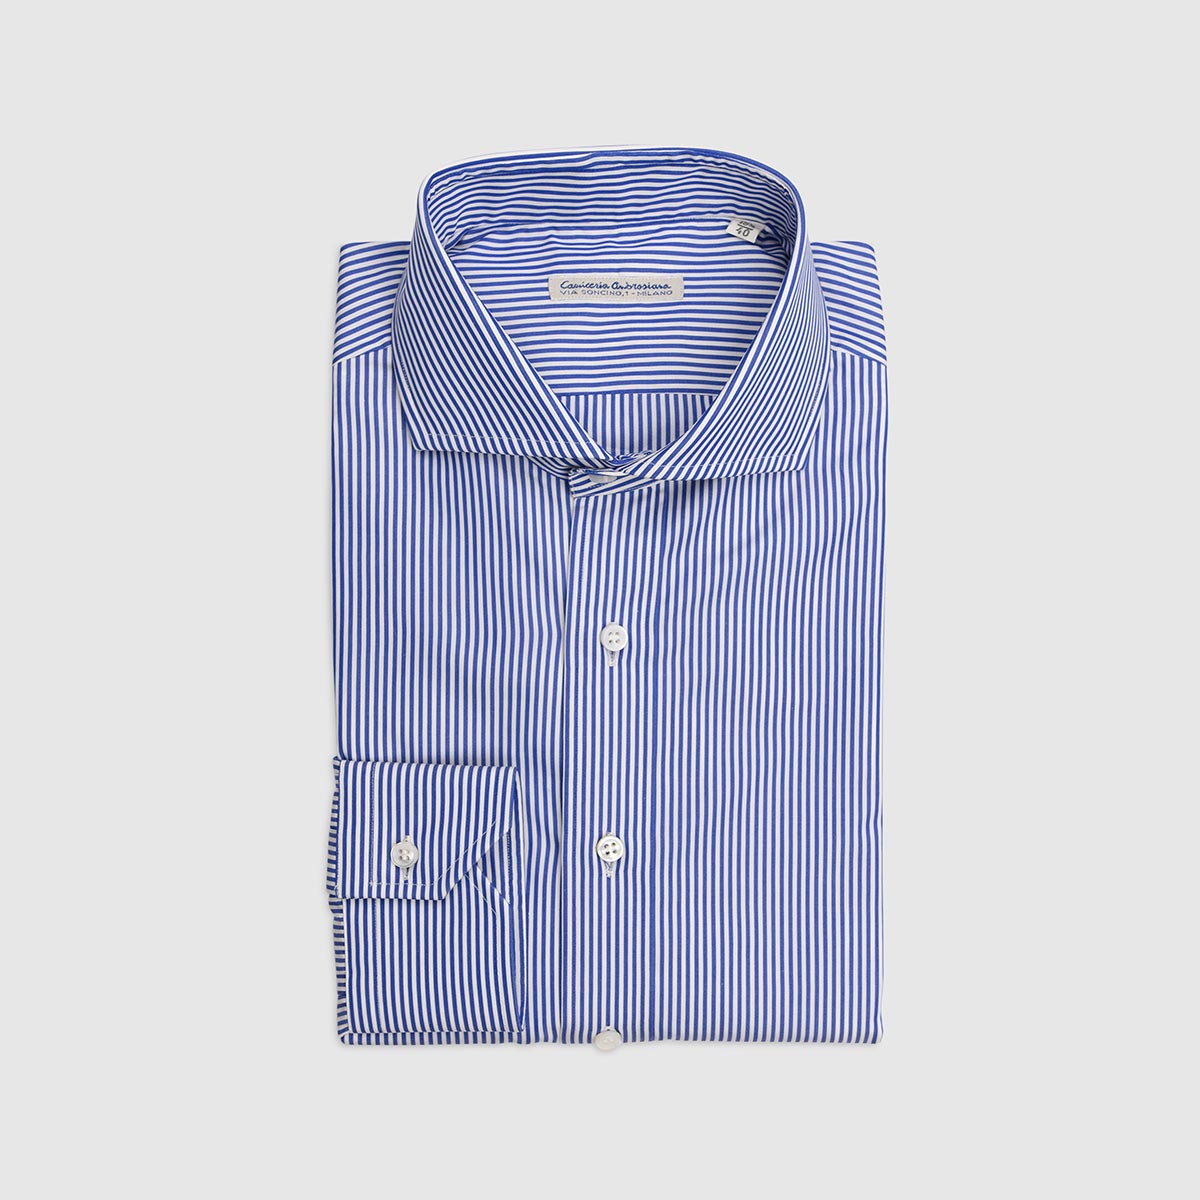 100% Double Twisted Popeline Cotton Shirt – Navy Blue and White Stripes Camiceria Ambrosiana on sale 2022